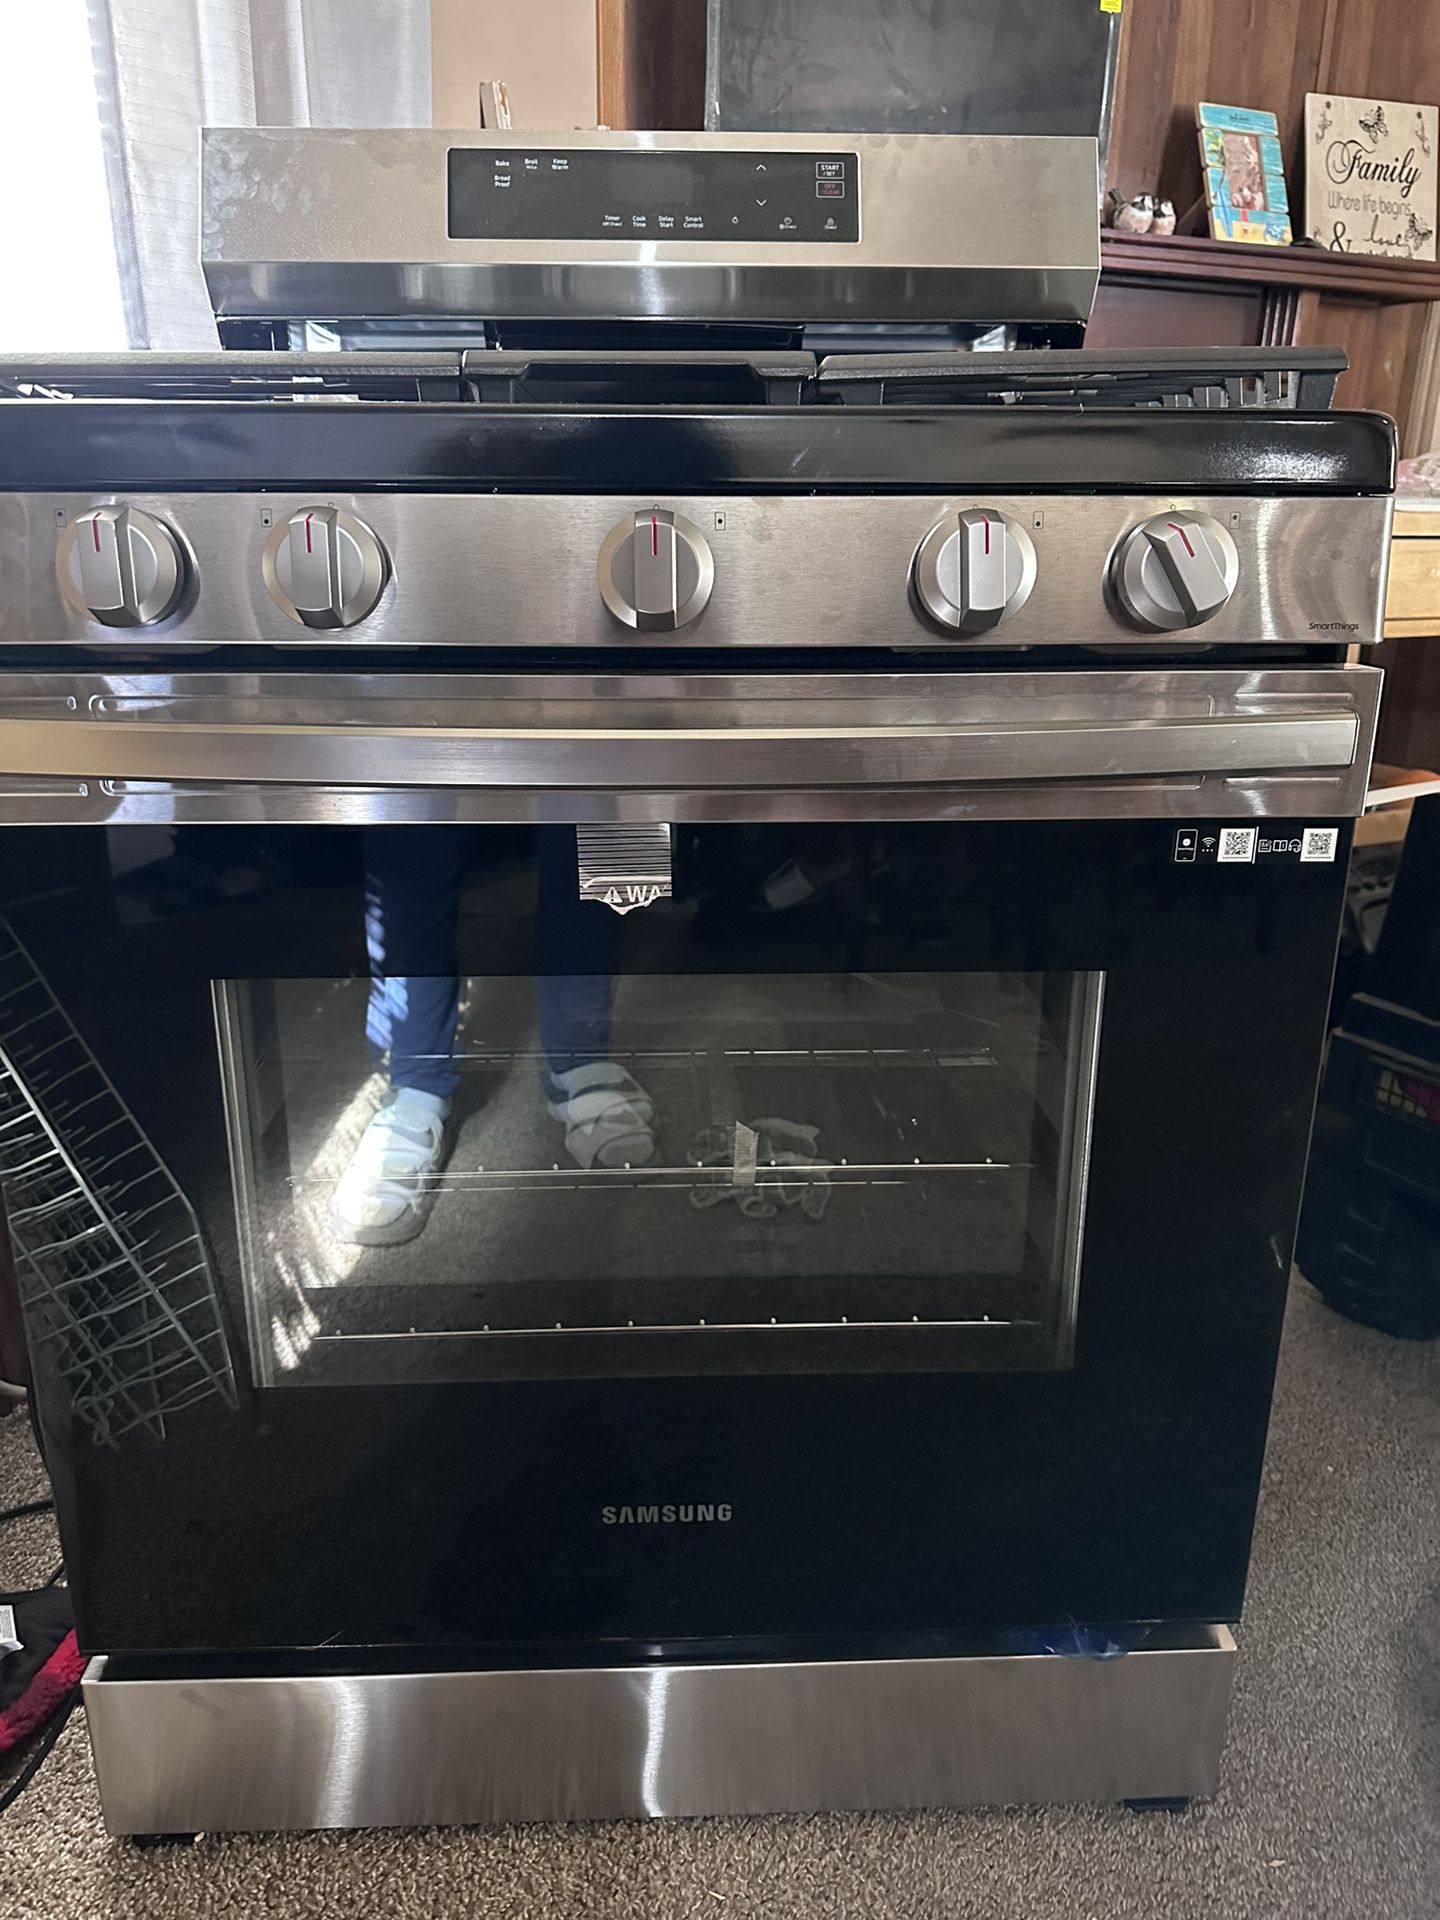 I'm selling a new gas stove